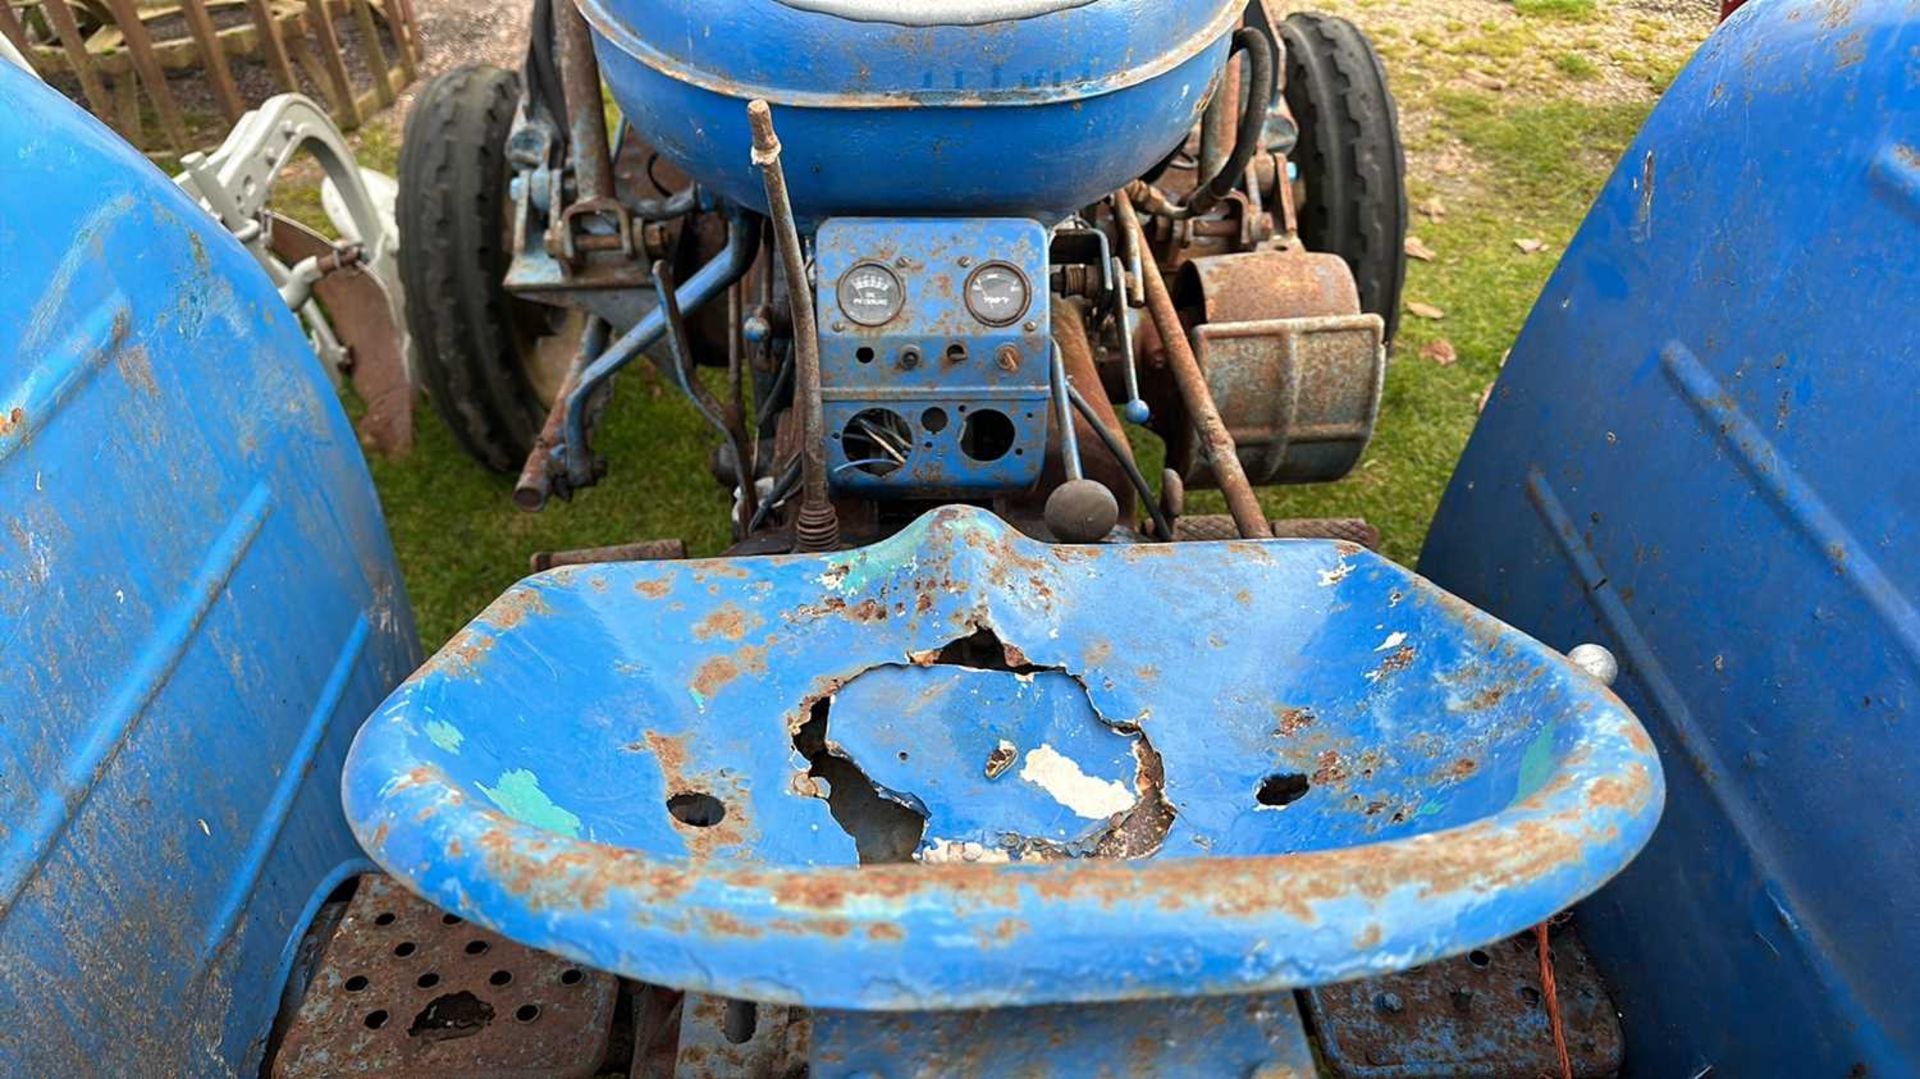 A Fordson Tractor with front loader arms, requiring full restoration - Image 9 of 14